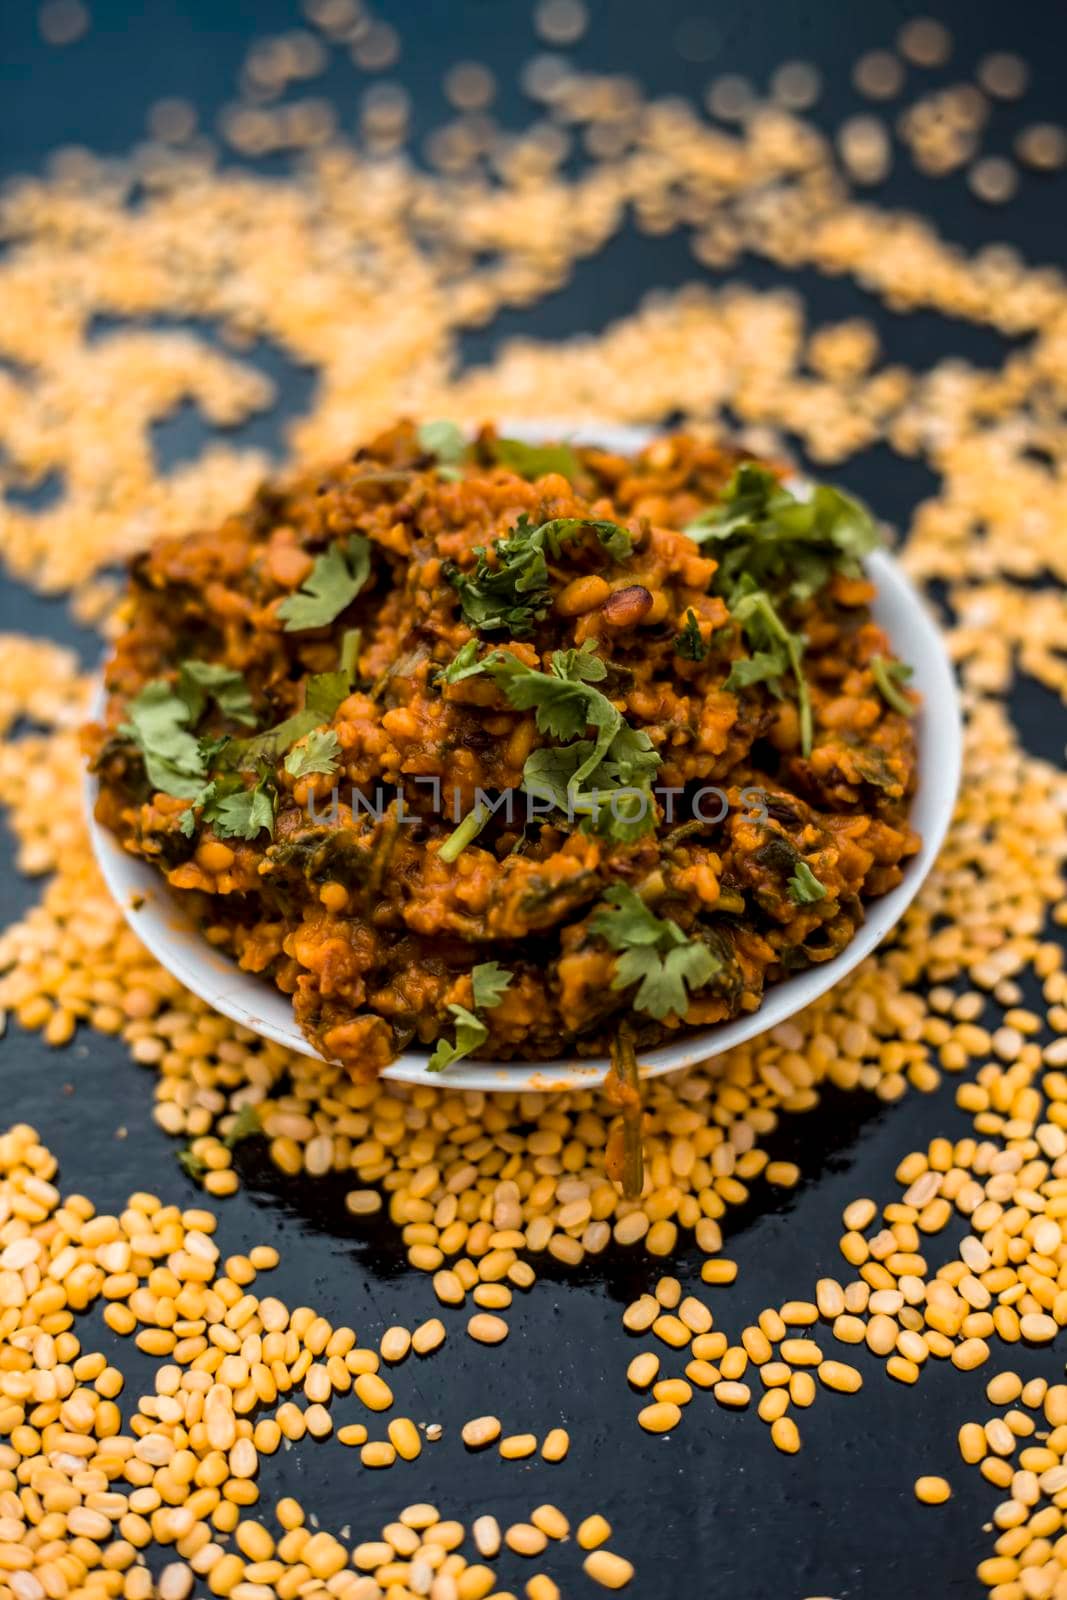 Famous Indian Punjabi dish i.e. Roasted dal with spinach in a glass plate on the wooden surface along with its main ingredients i.e. Unskinned split moong dal. by mirzamlk